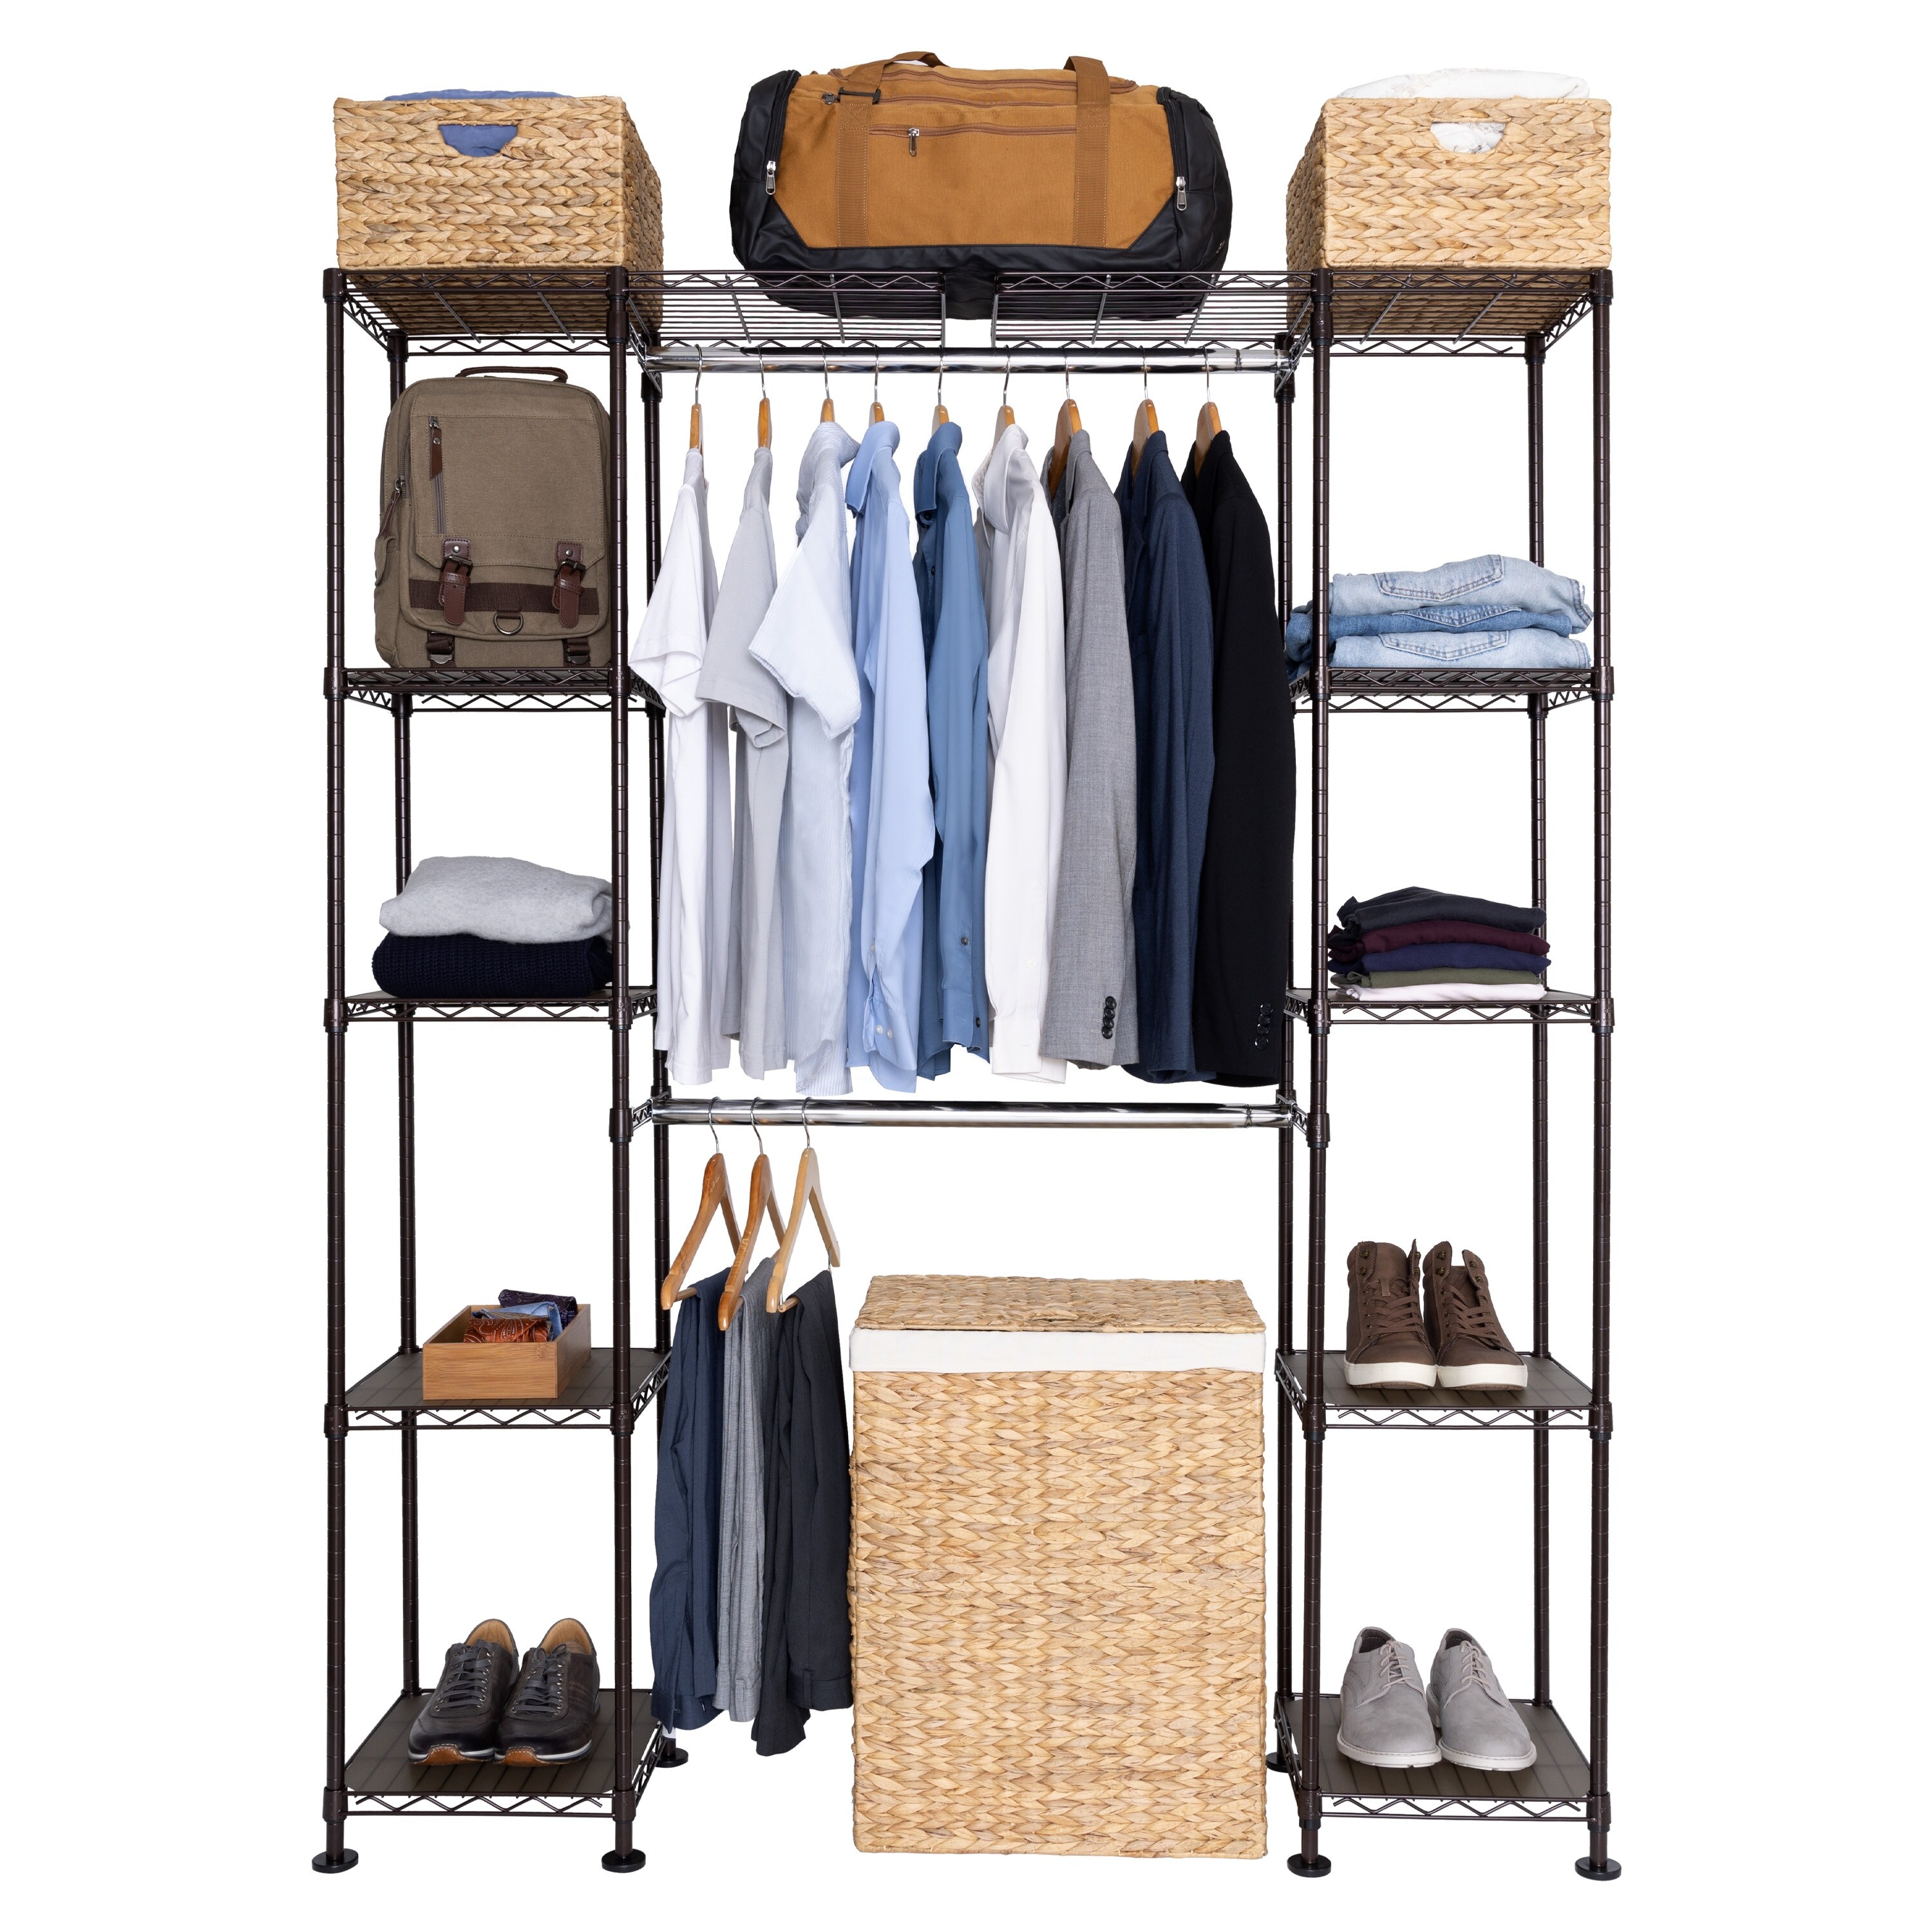 https://ak1.ostkcdn.com/images/products/is/images/direct/197481090005a617af7c410f0f977a88549f672a/Satin-Bronze-Expandable-Closet-Organizer-System.jpg